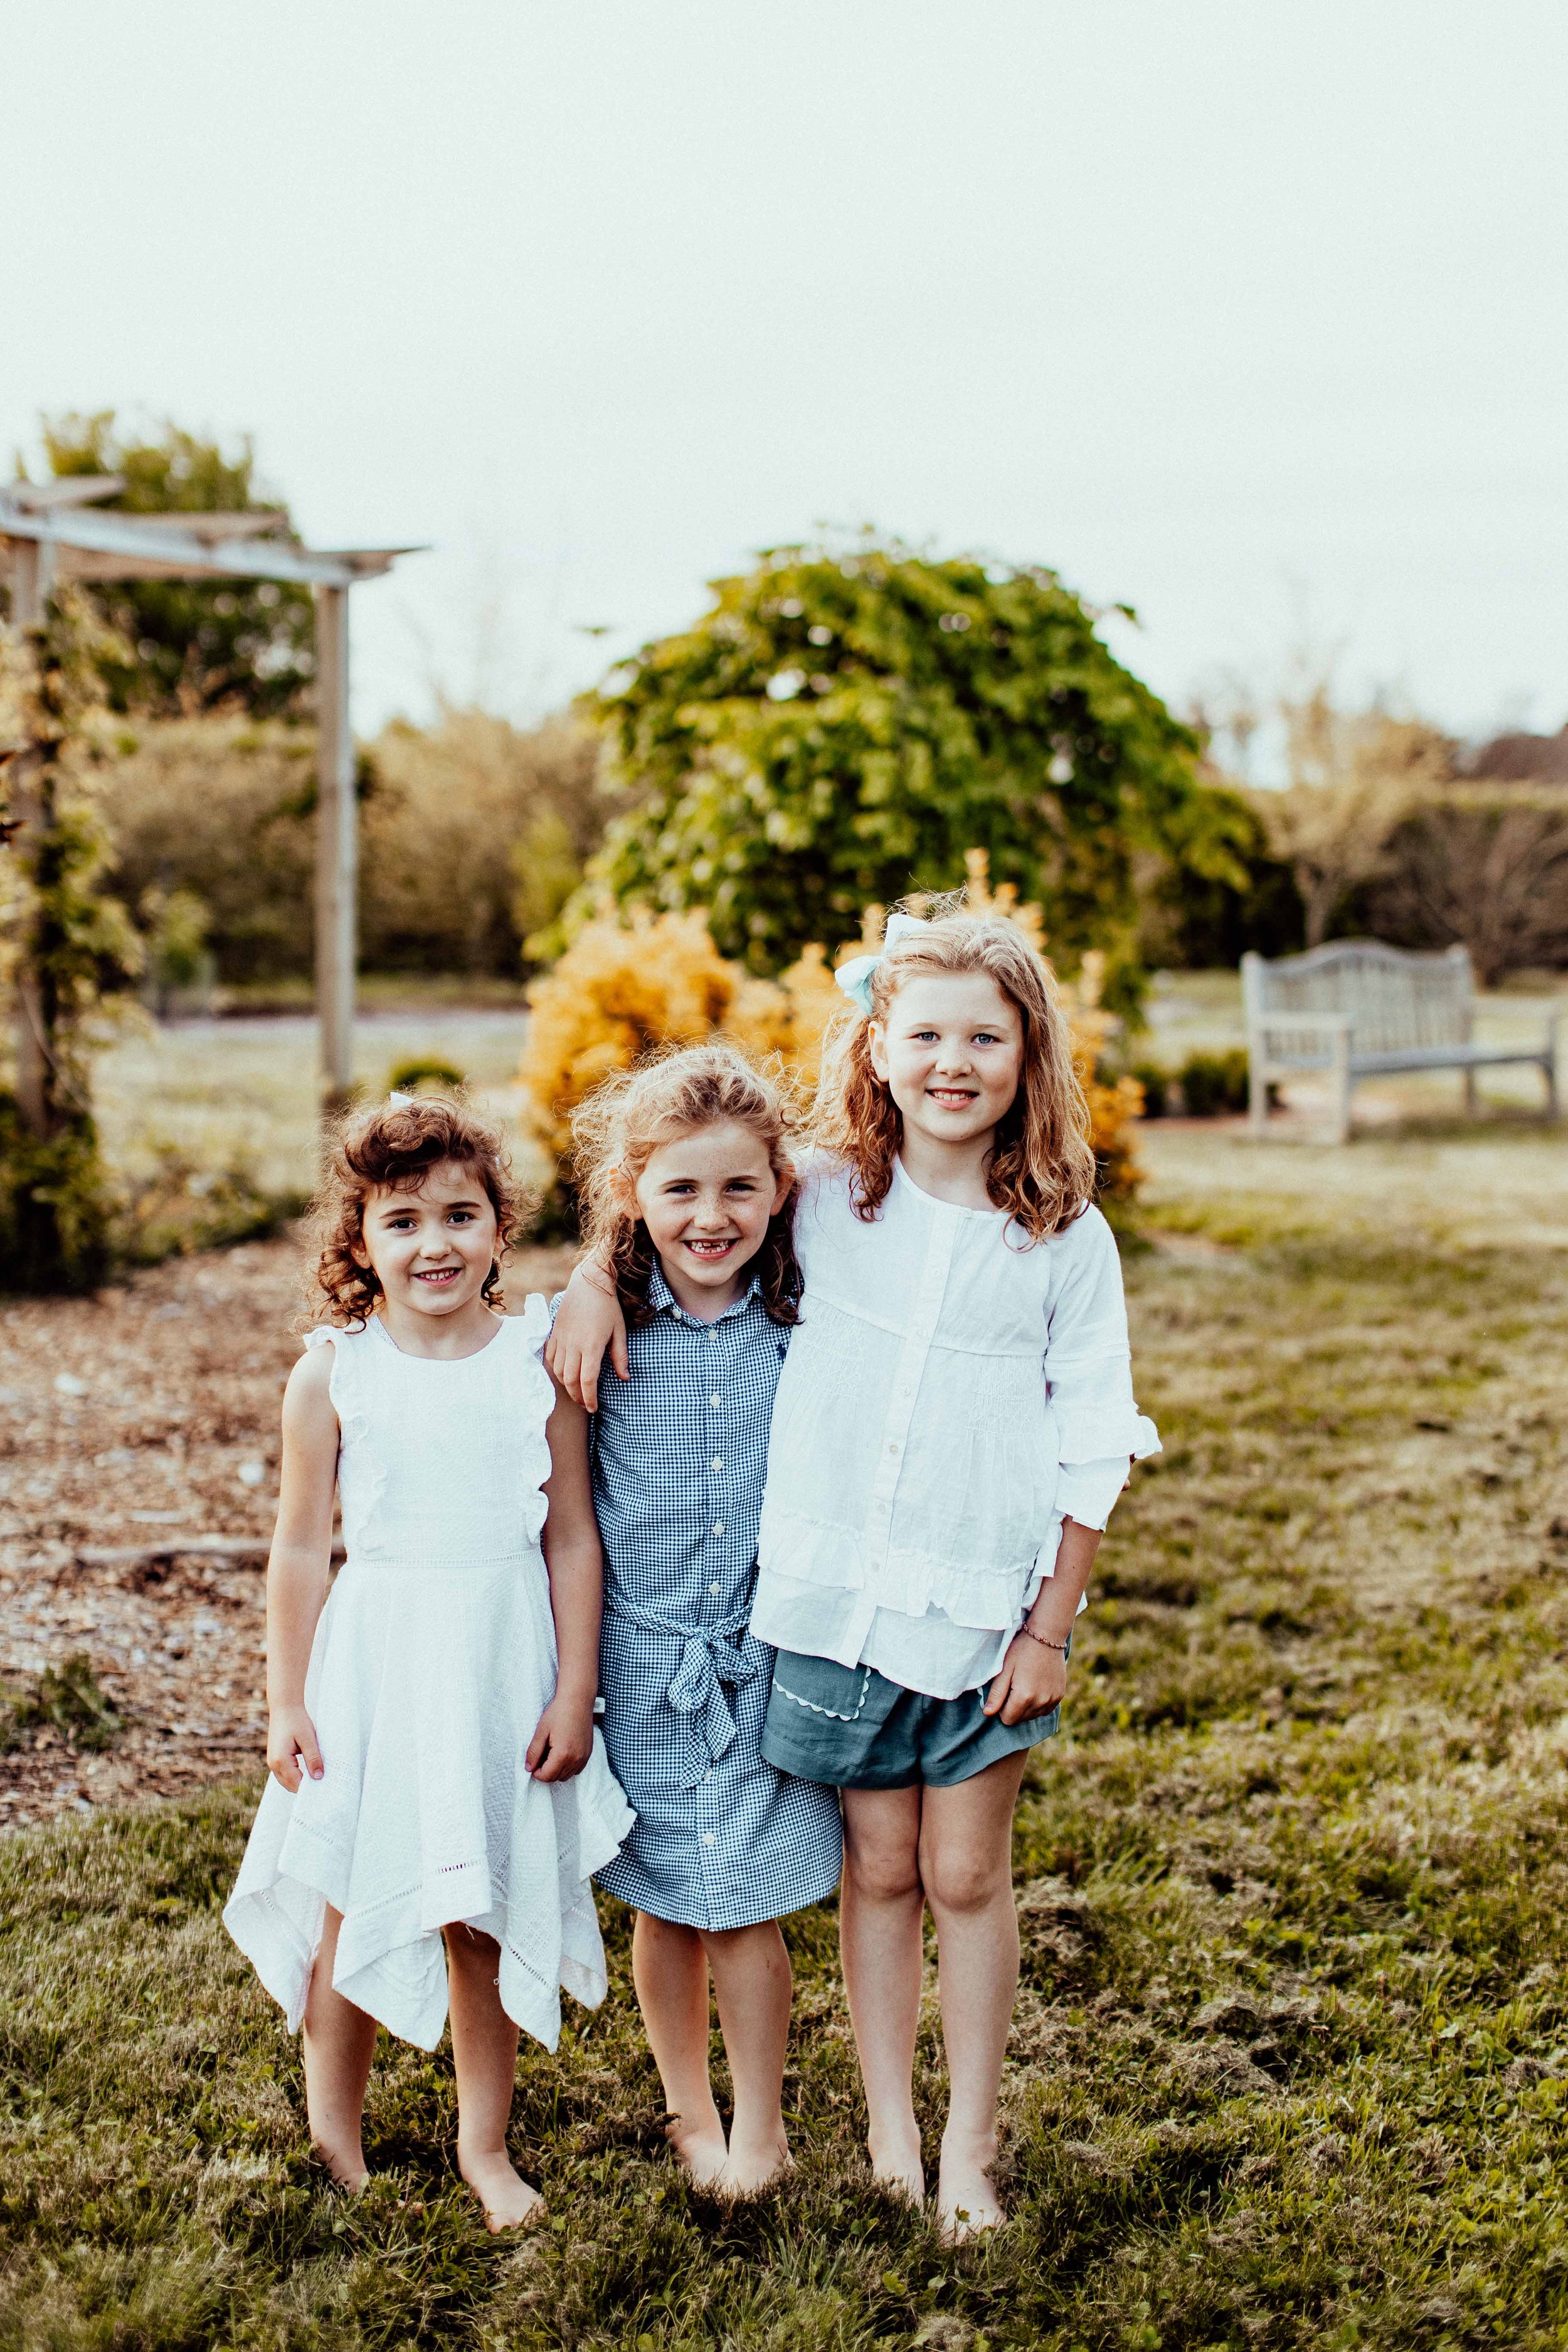 carroll-family-exeter-southern-hoghlands-inhome-family-lifestyle-wollondilly-camden-macarthur-sydney-photography-www.emilyobrienphotography.net-81.jpg